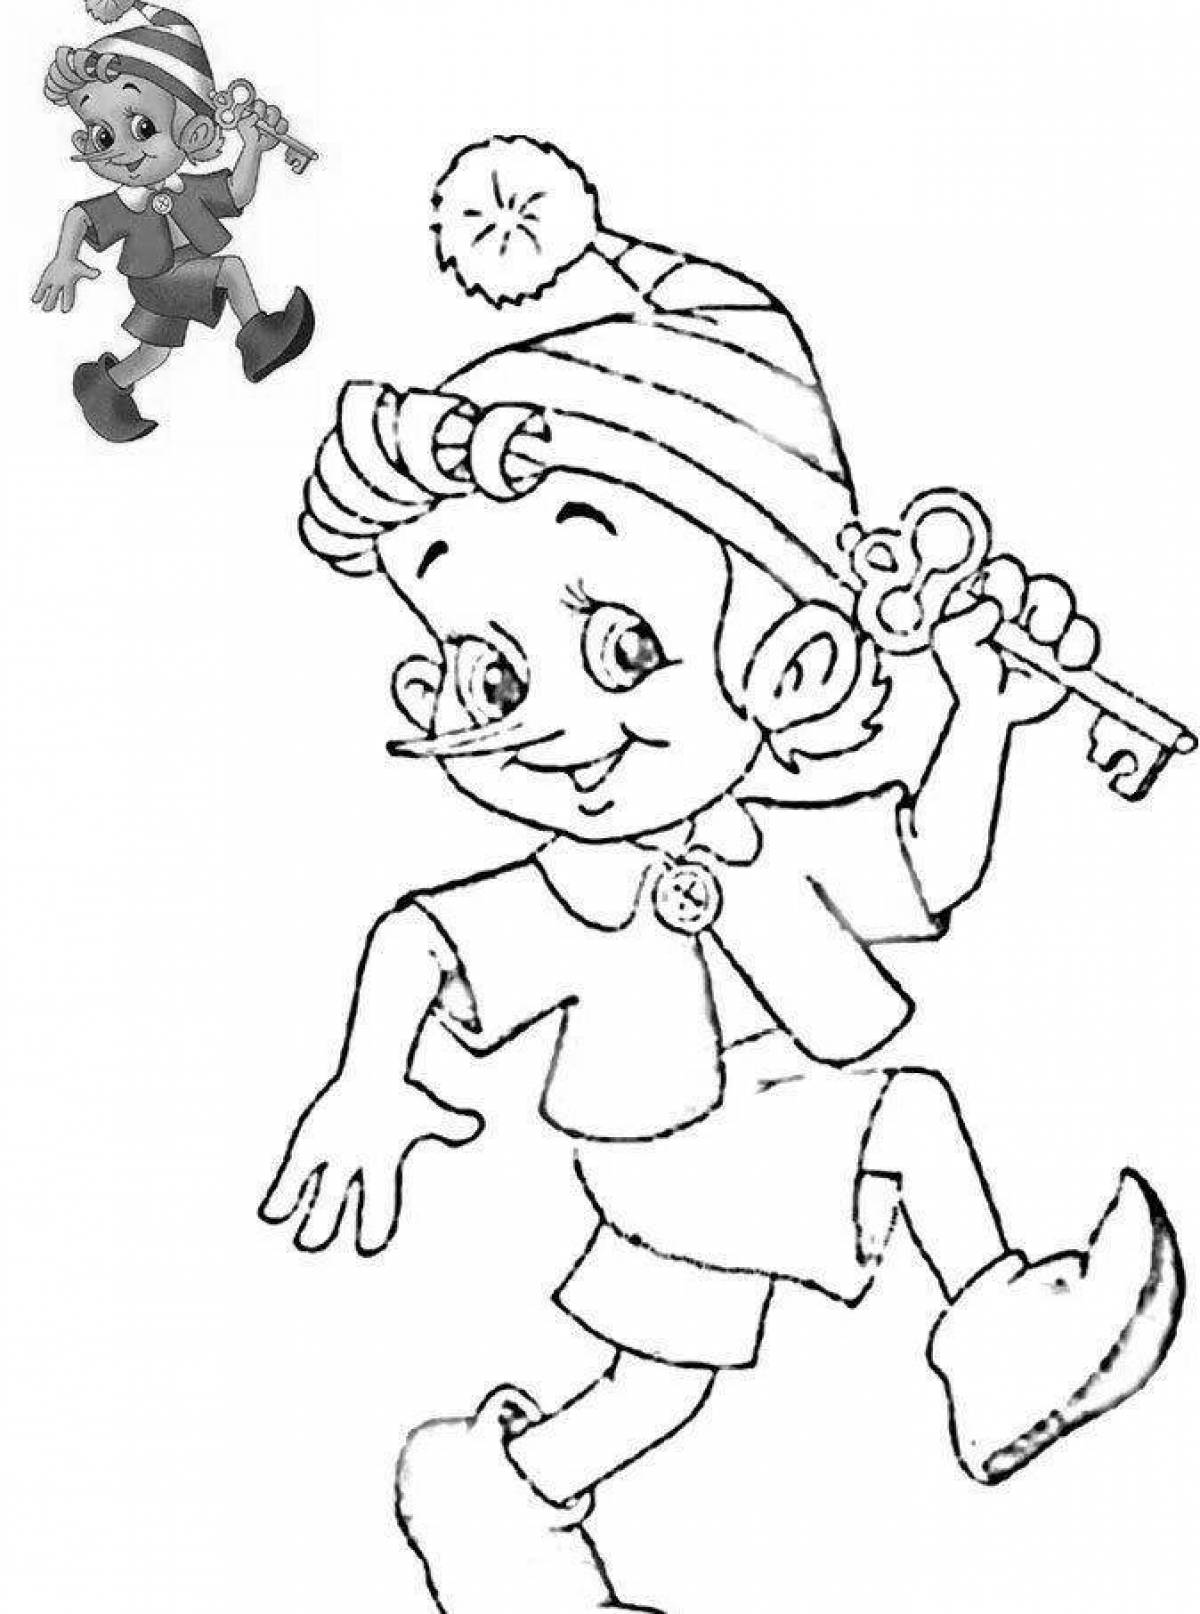 The Charming Adventures of Pinocchio coloring book